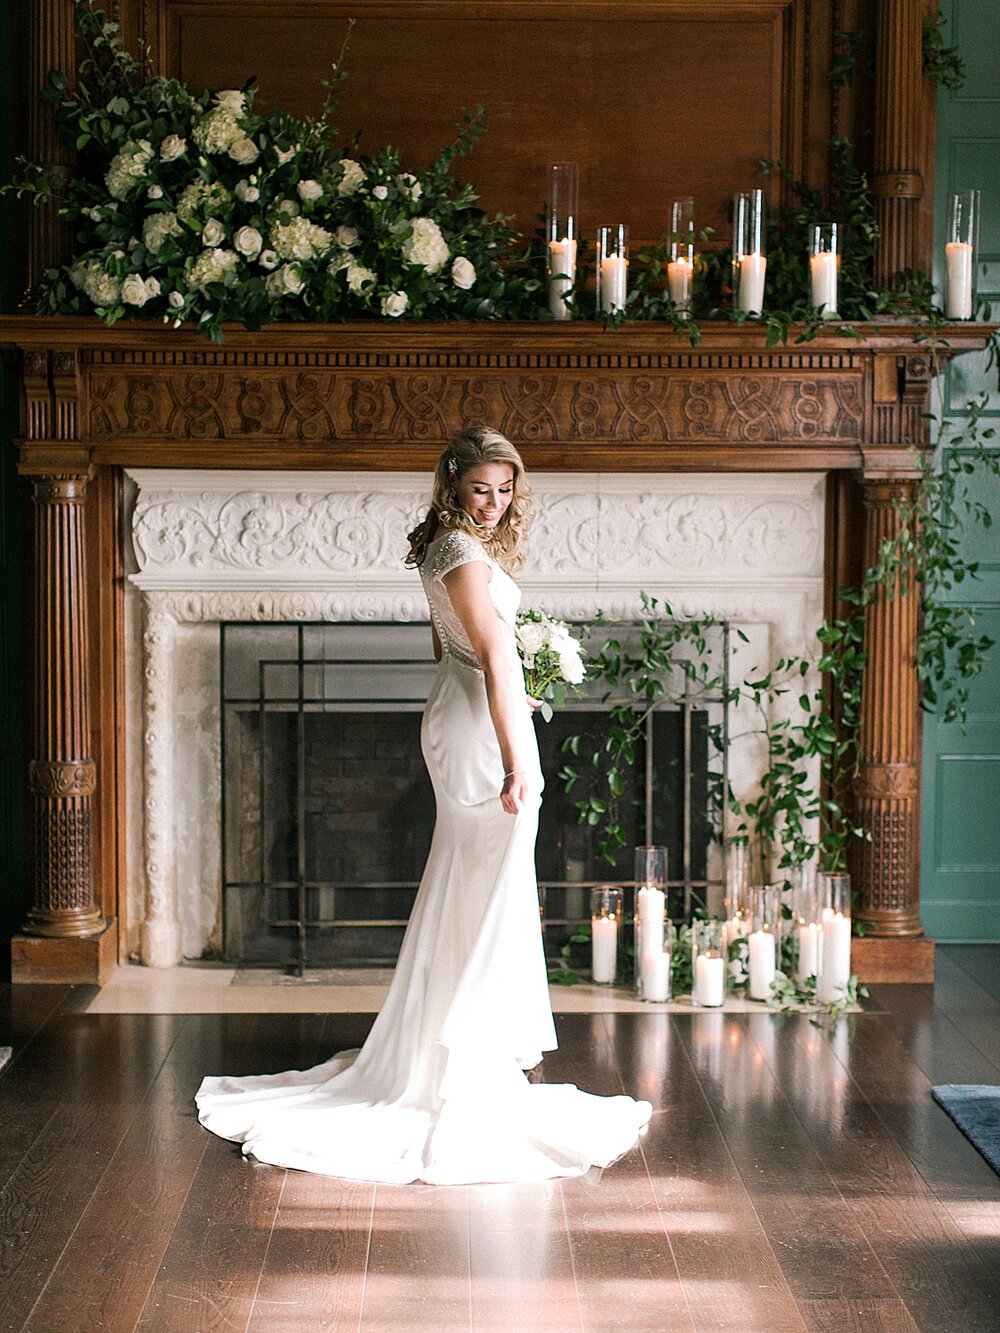 bridal portraits in front of historic fireplace lined with candles at Natirar Mansion | Tri-State area wedding venues photographed by Asher Gardner Photography